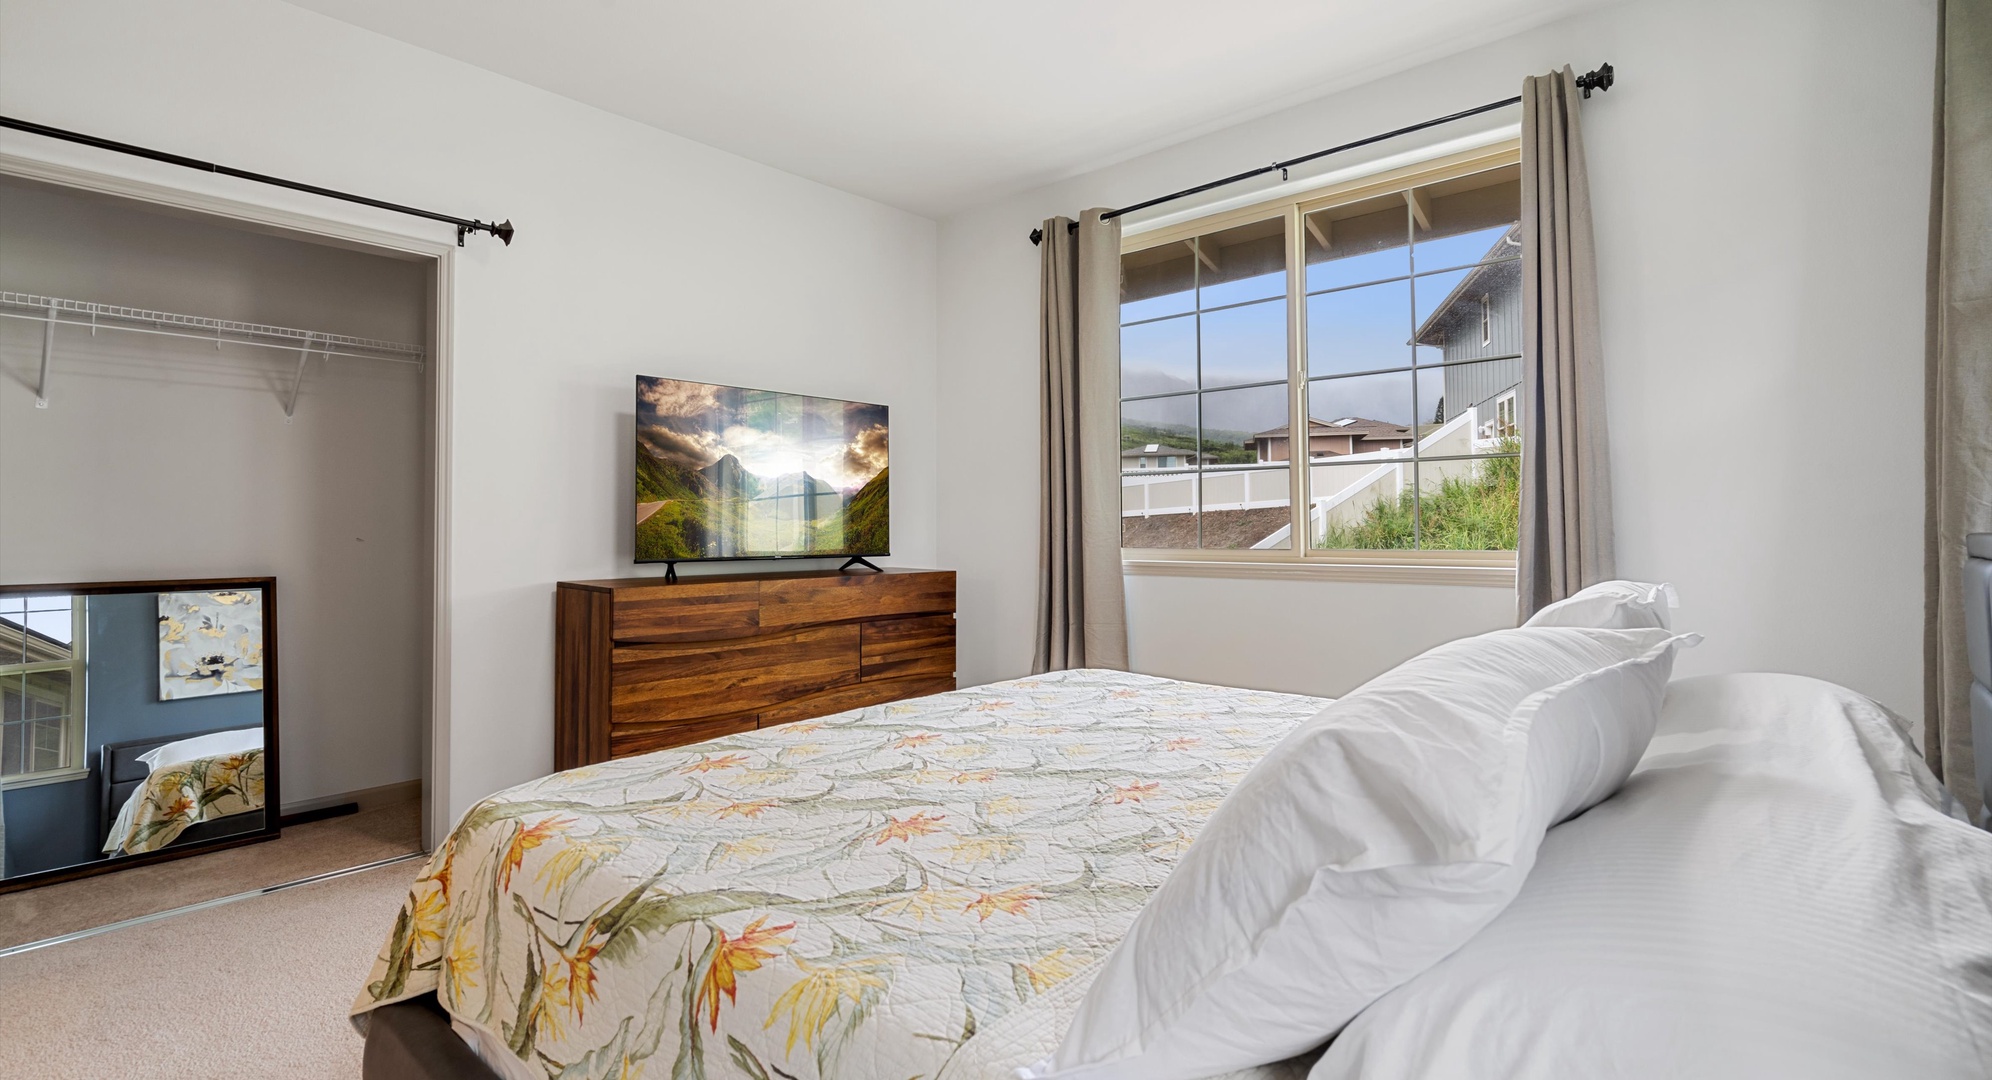 Waianae Vacation Rentals, Makaha Cottages Mauna Olu #76 - 3 - King size bed, TV and large windows.